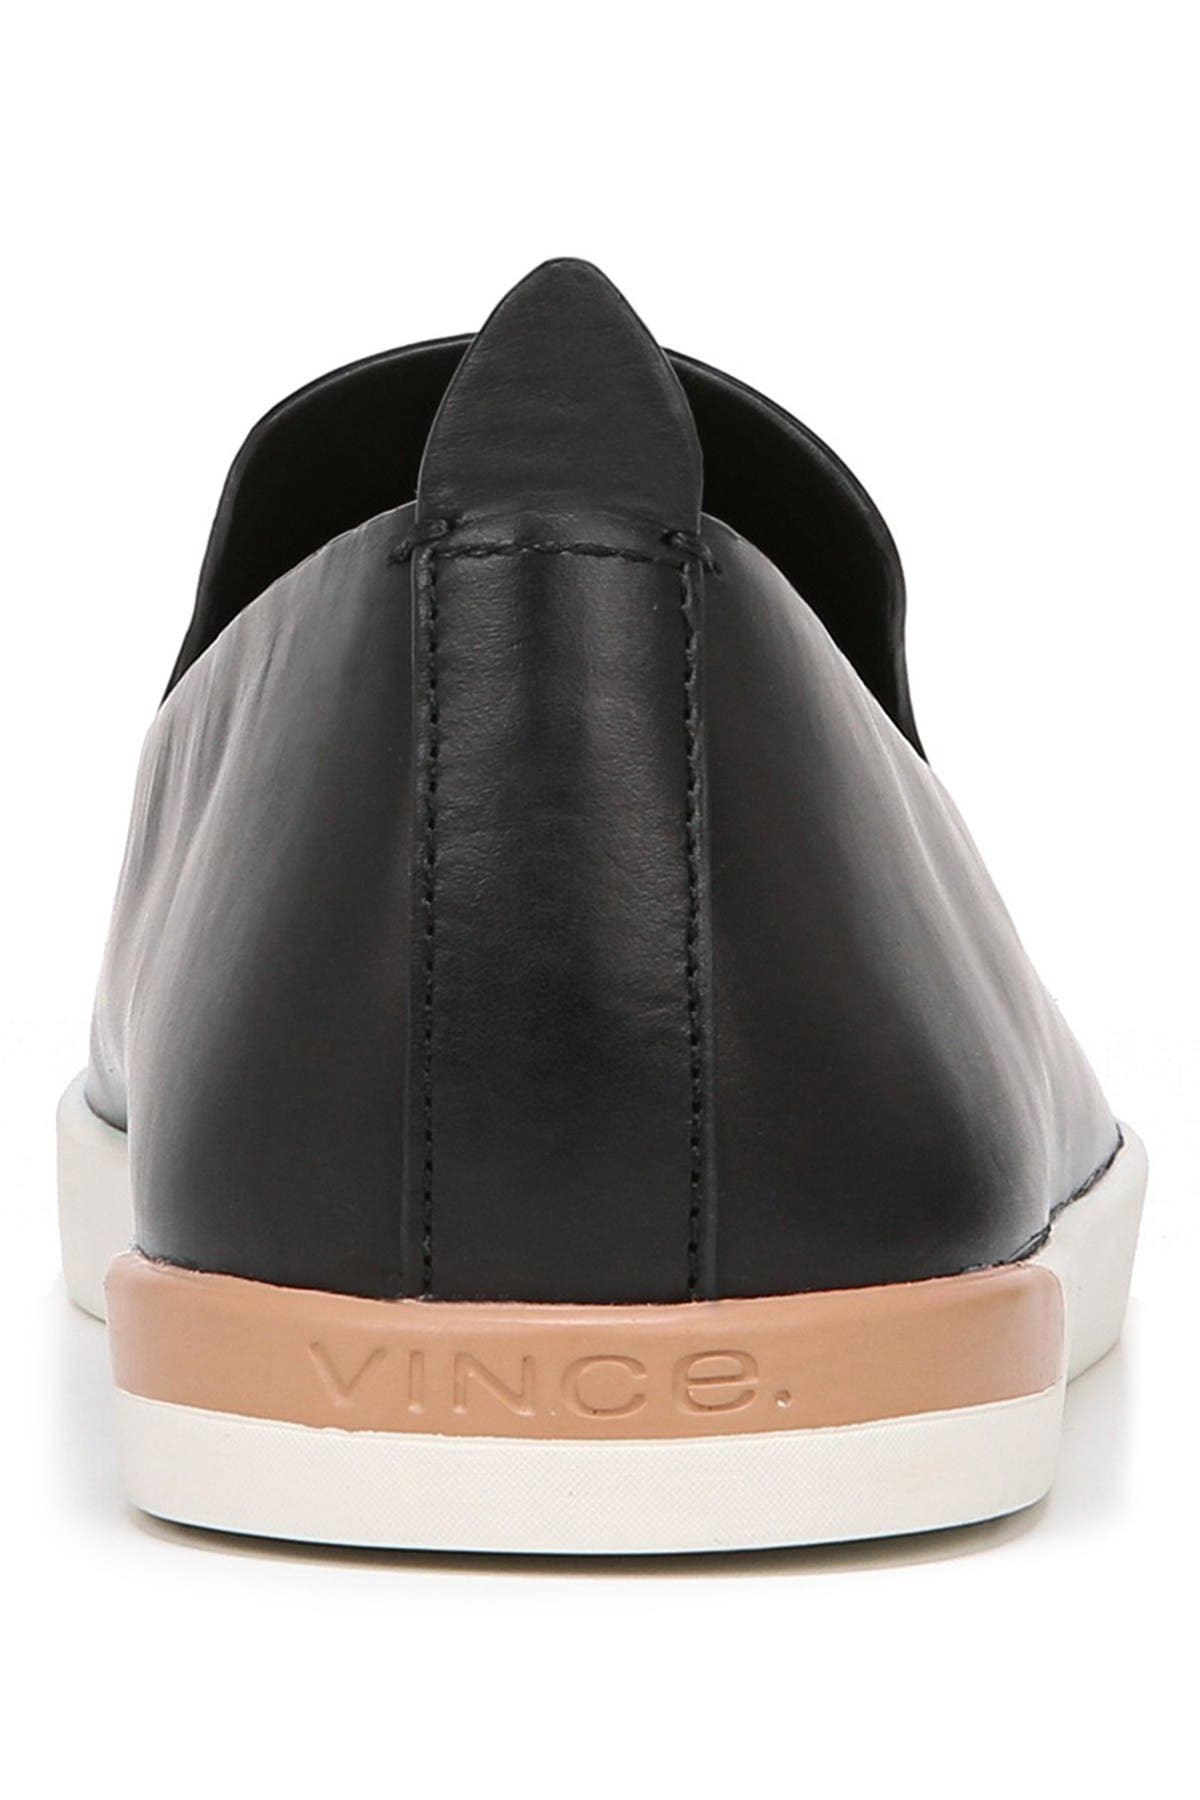 vince vero leather sneakers